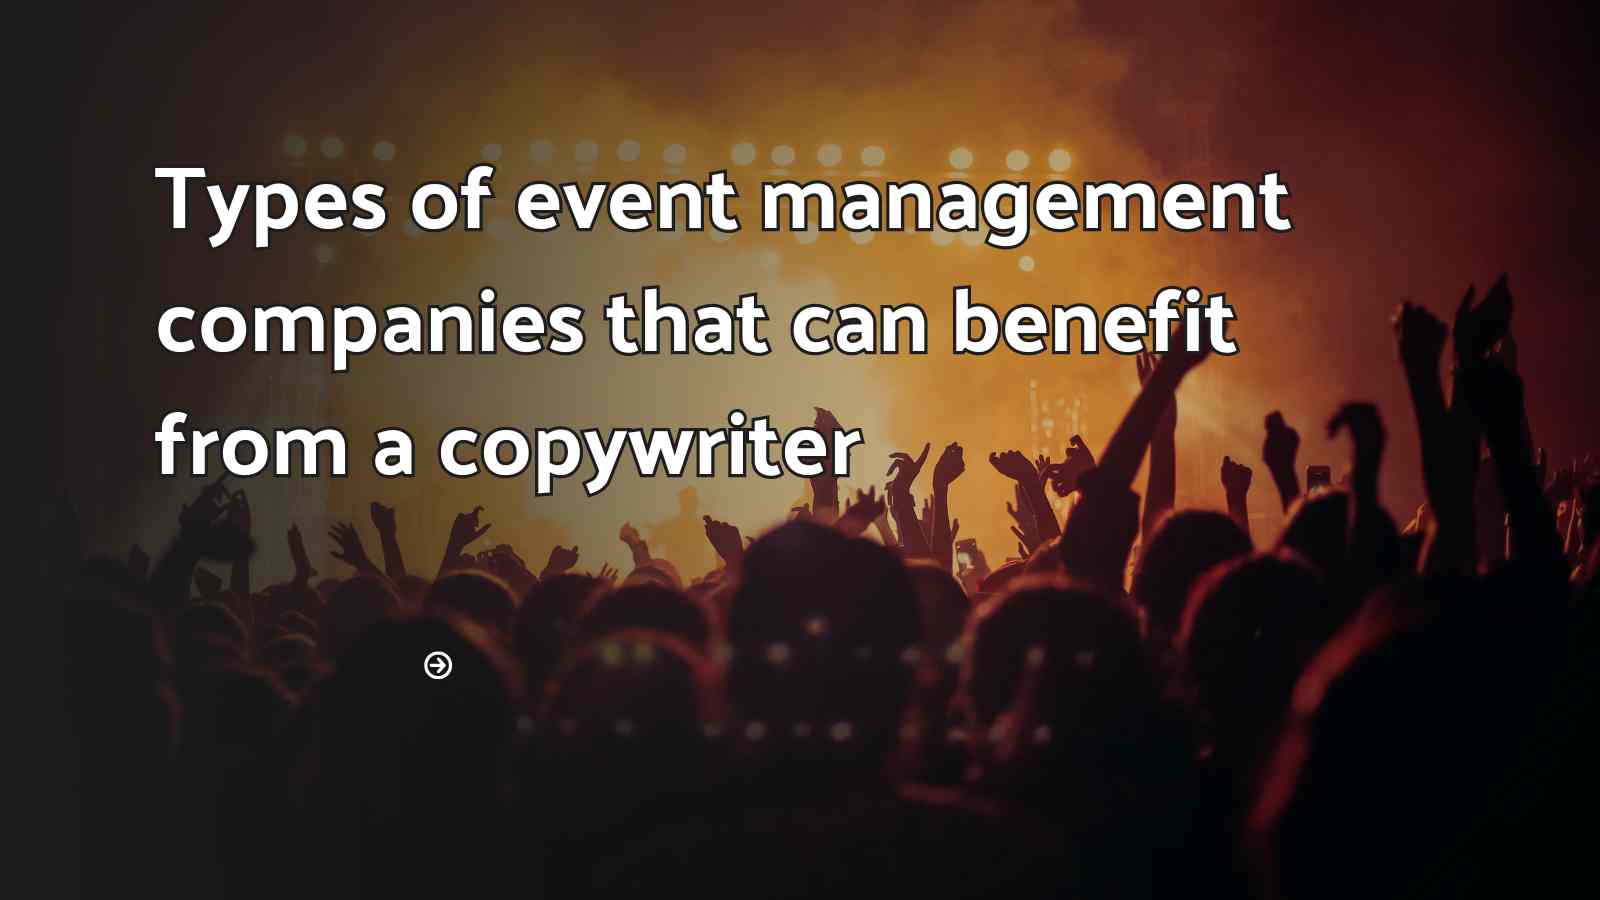 Types of event management companies that can benefit from a copywriter